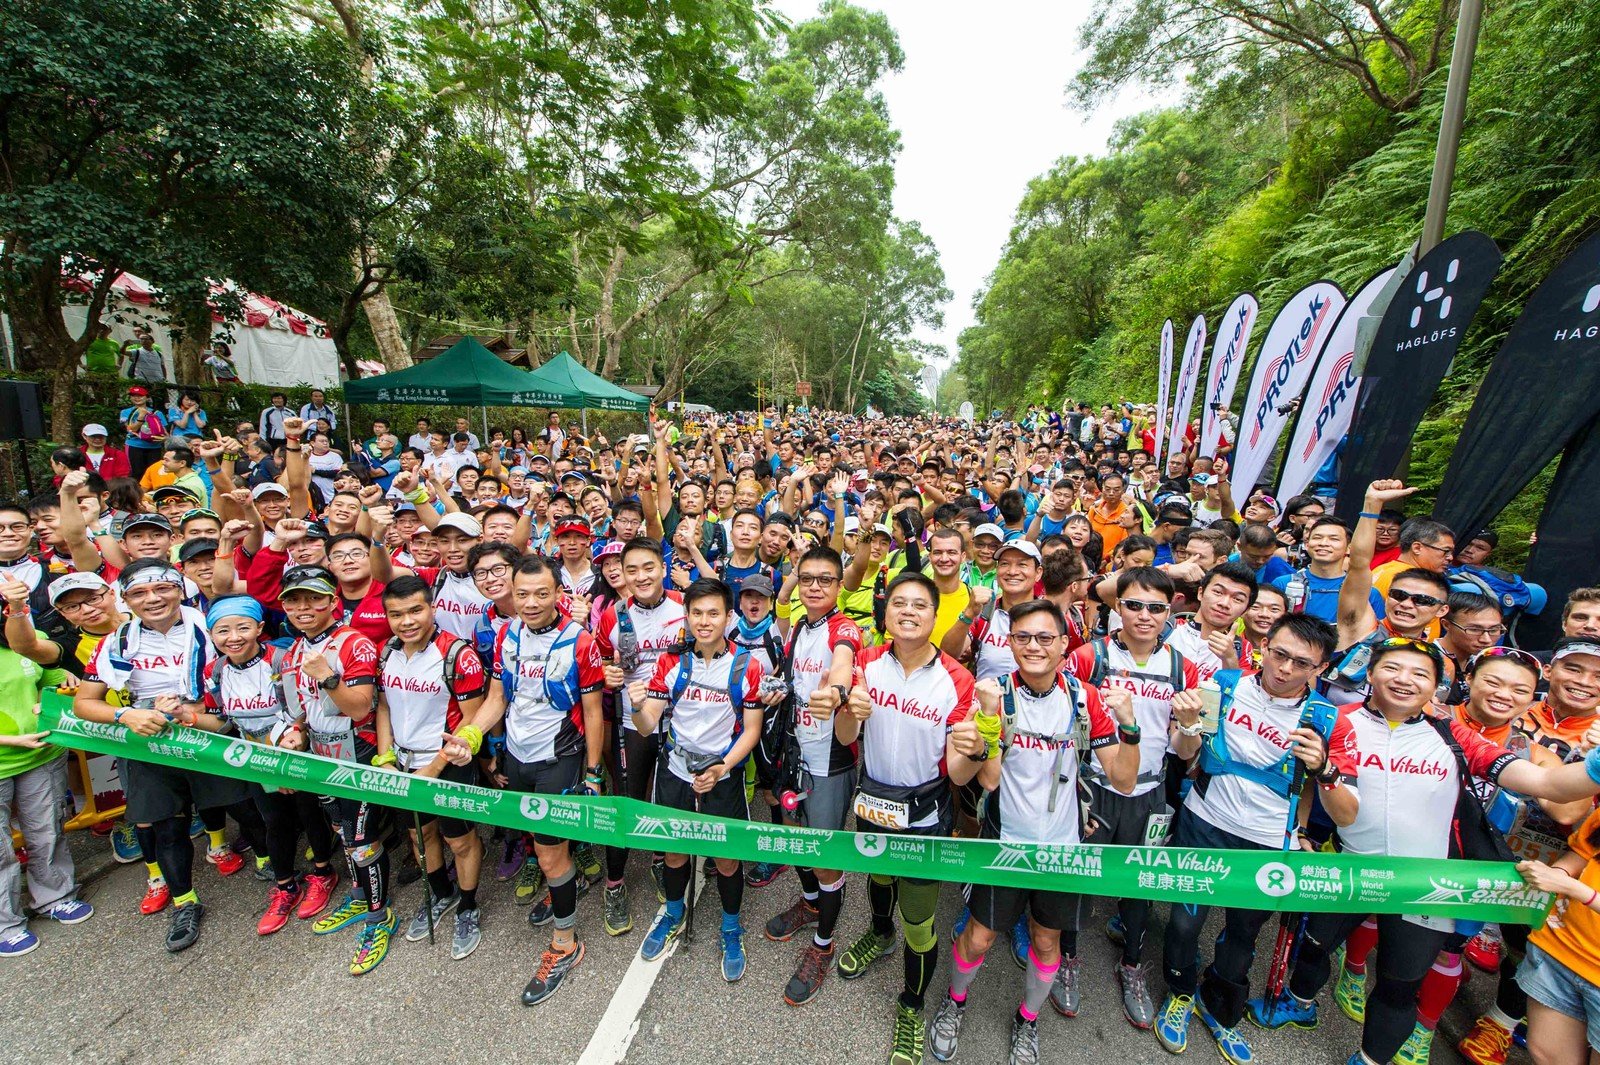 A total of 5,200 walkers are undertaking the 100 km challenge and will trek along the MacLehose Trail and other trails in teams of four within 48 hours.